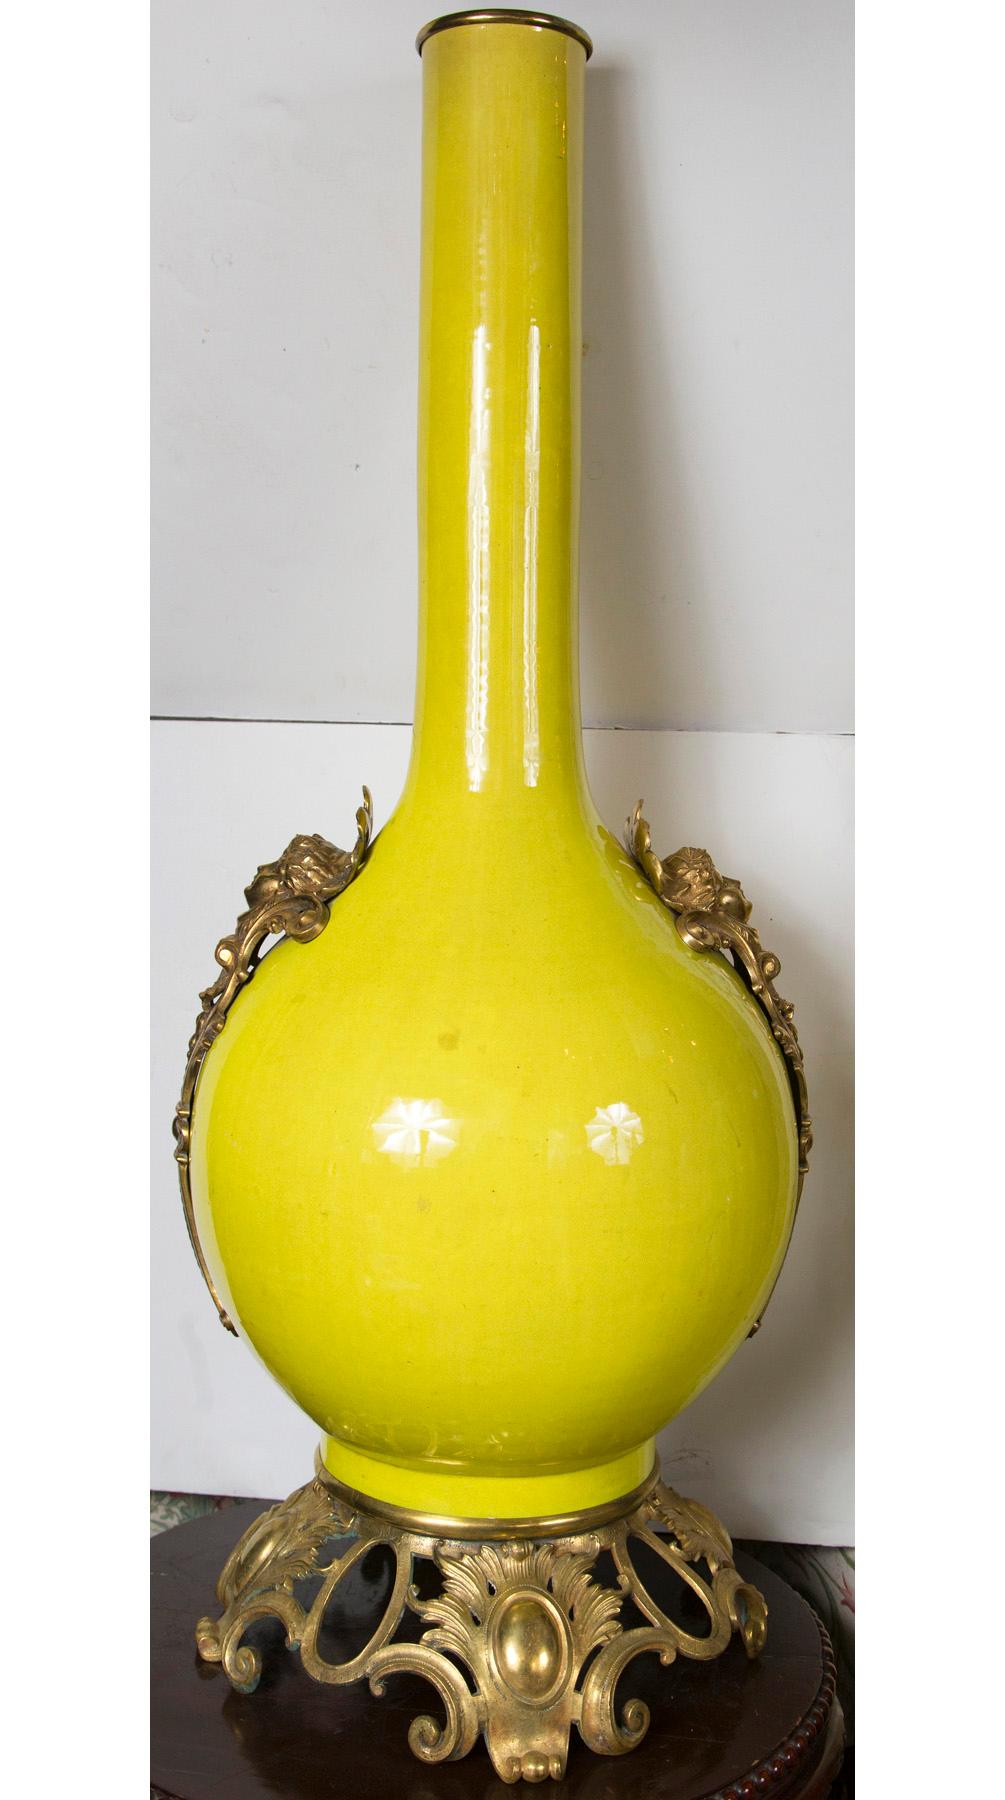 Glazed in a bright yellow with female head masks on either side and a bronze rococo base. Bronze ring above open neck.
The diameter of the base is approximate 15 inches.
The height of 41 inches includes the base.